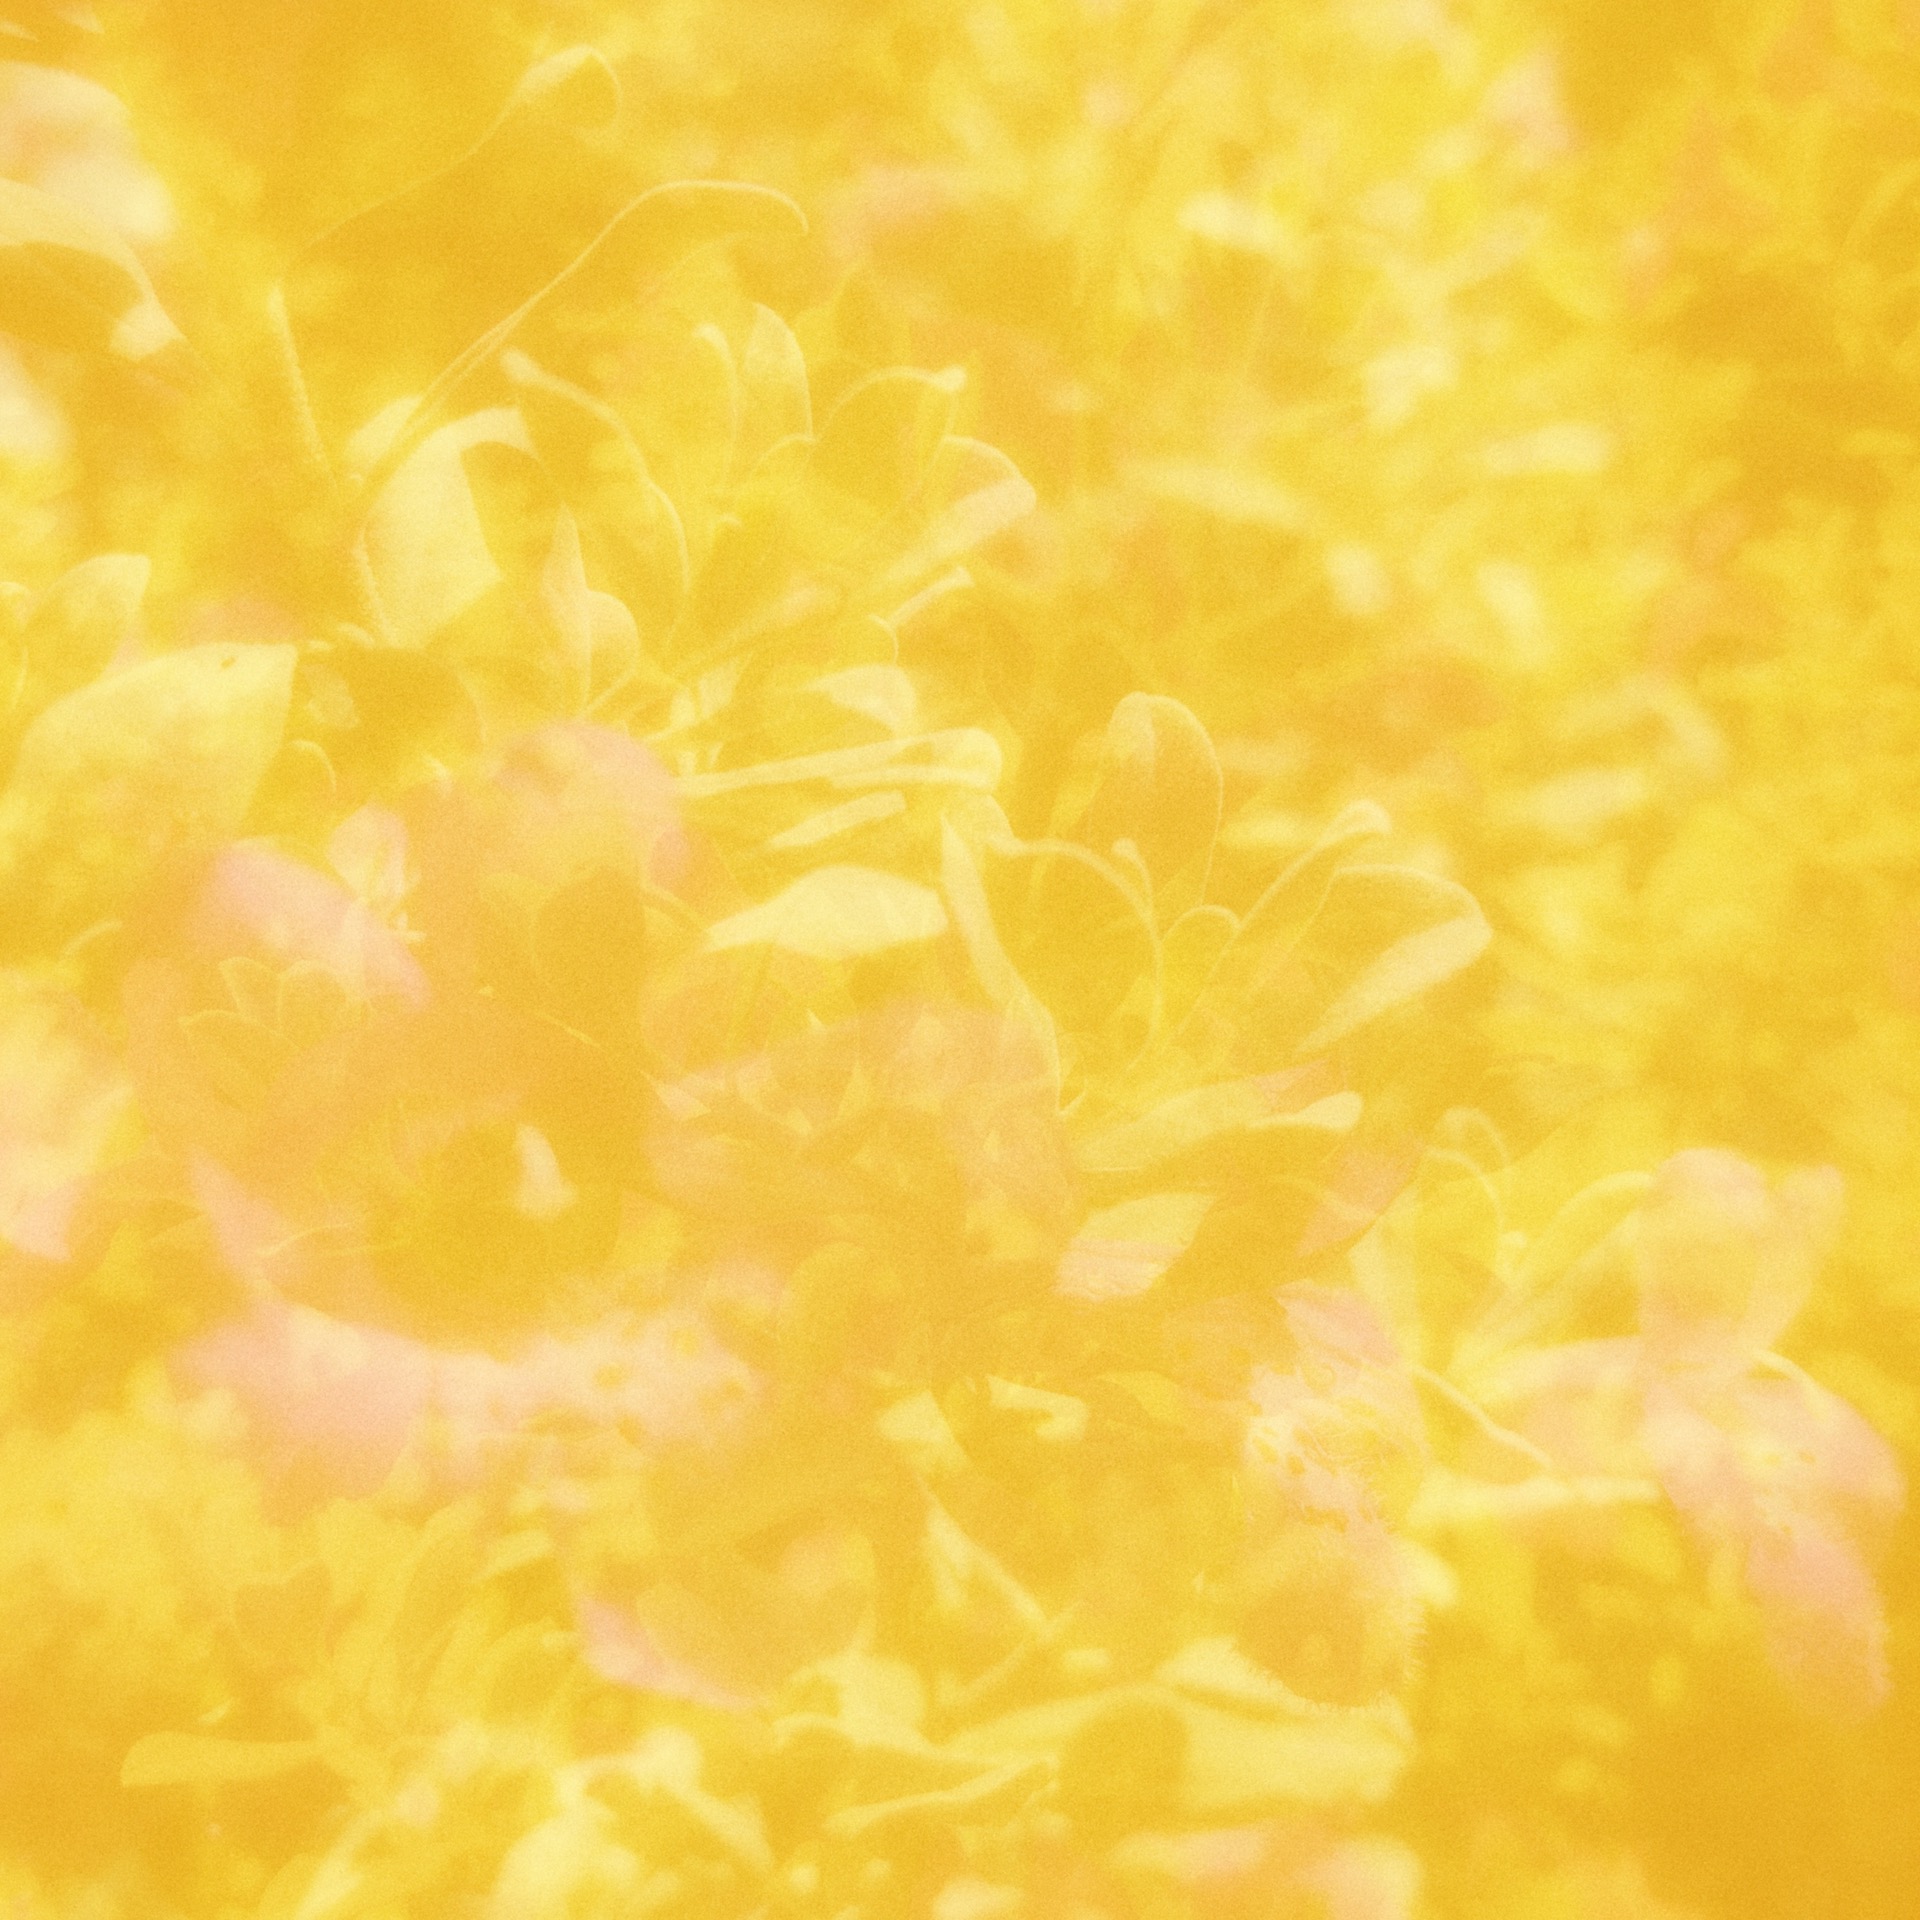 Album art for the album “19”. Trademark double exposure closeups of Texas Purple Sage, overlaid with a yellow hue.